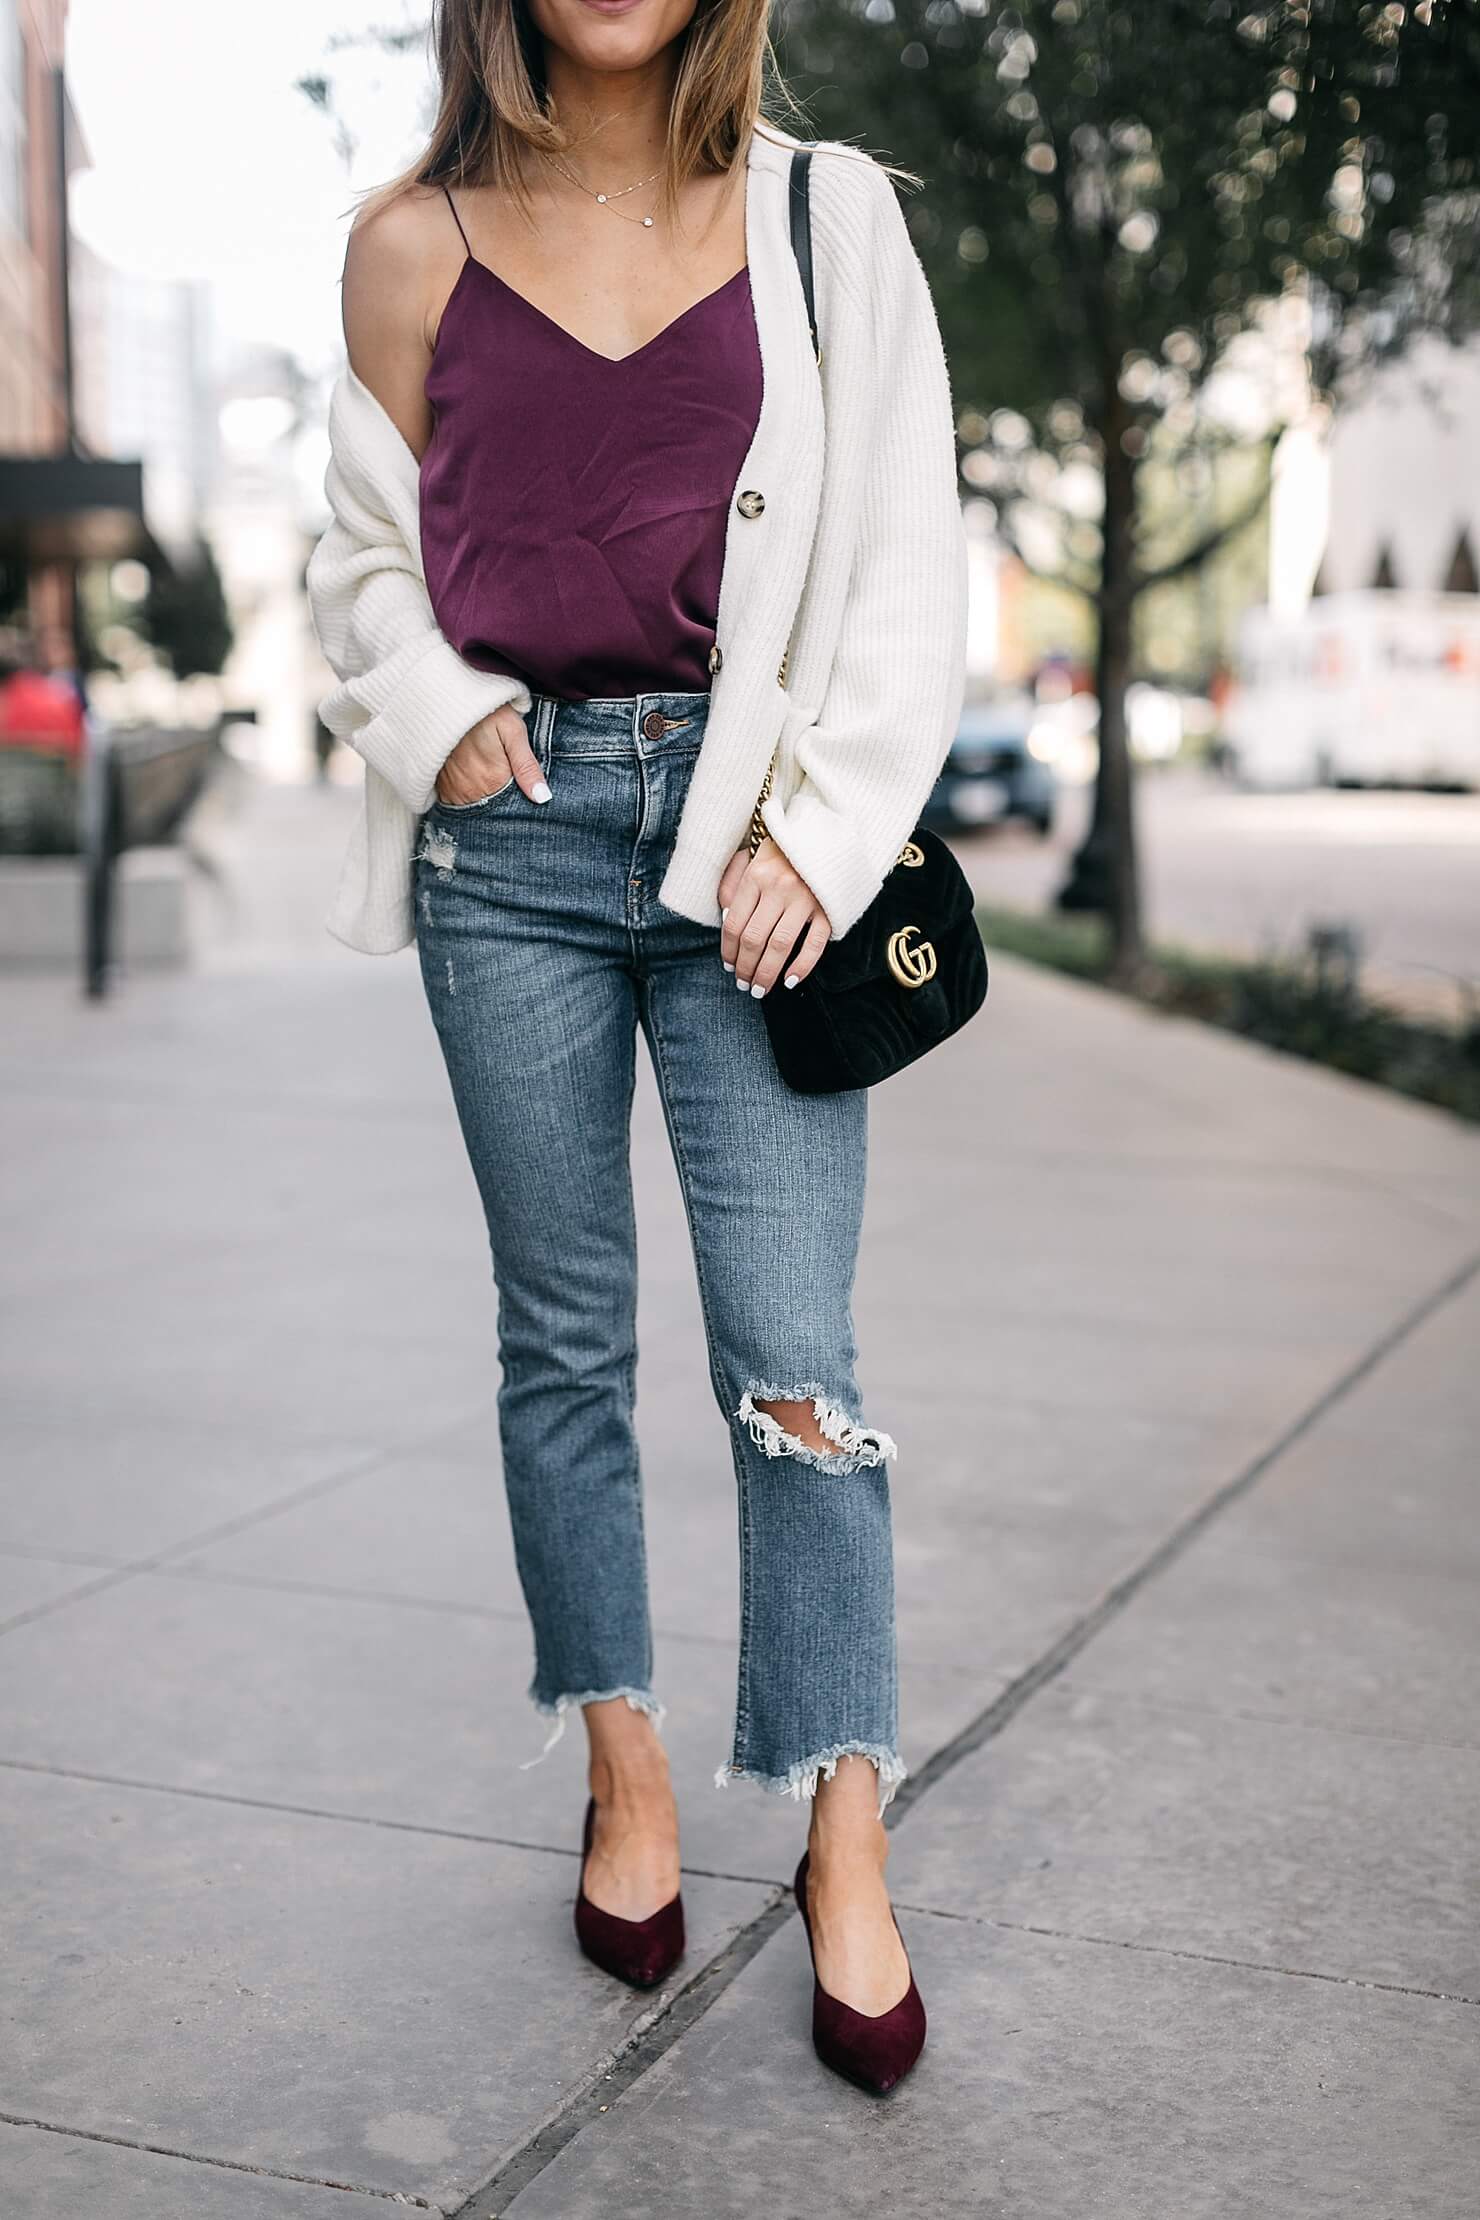 camisole tank, cream cardigan, girlfriend jeans and kitten heels with gucci bag